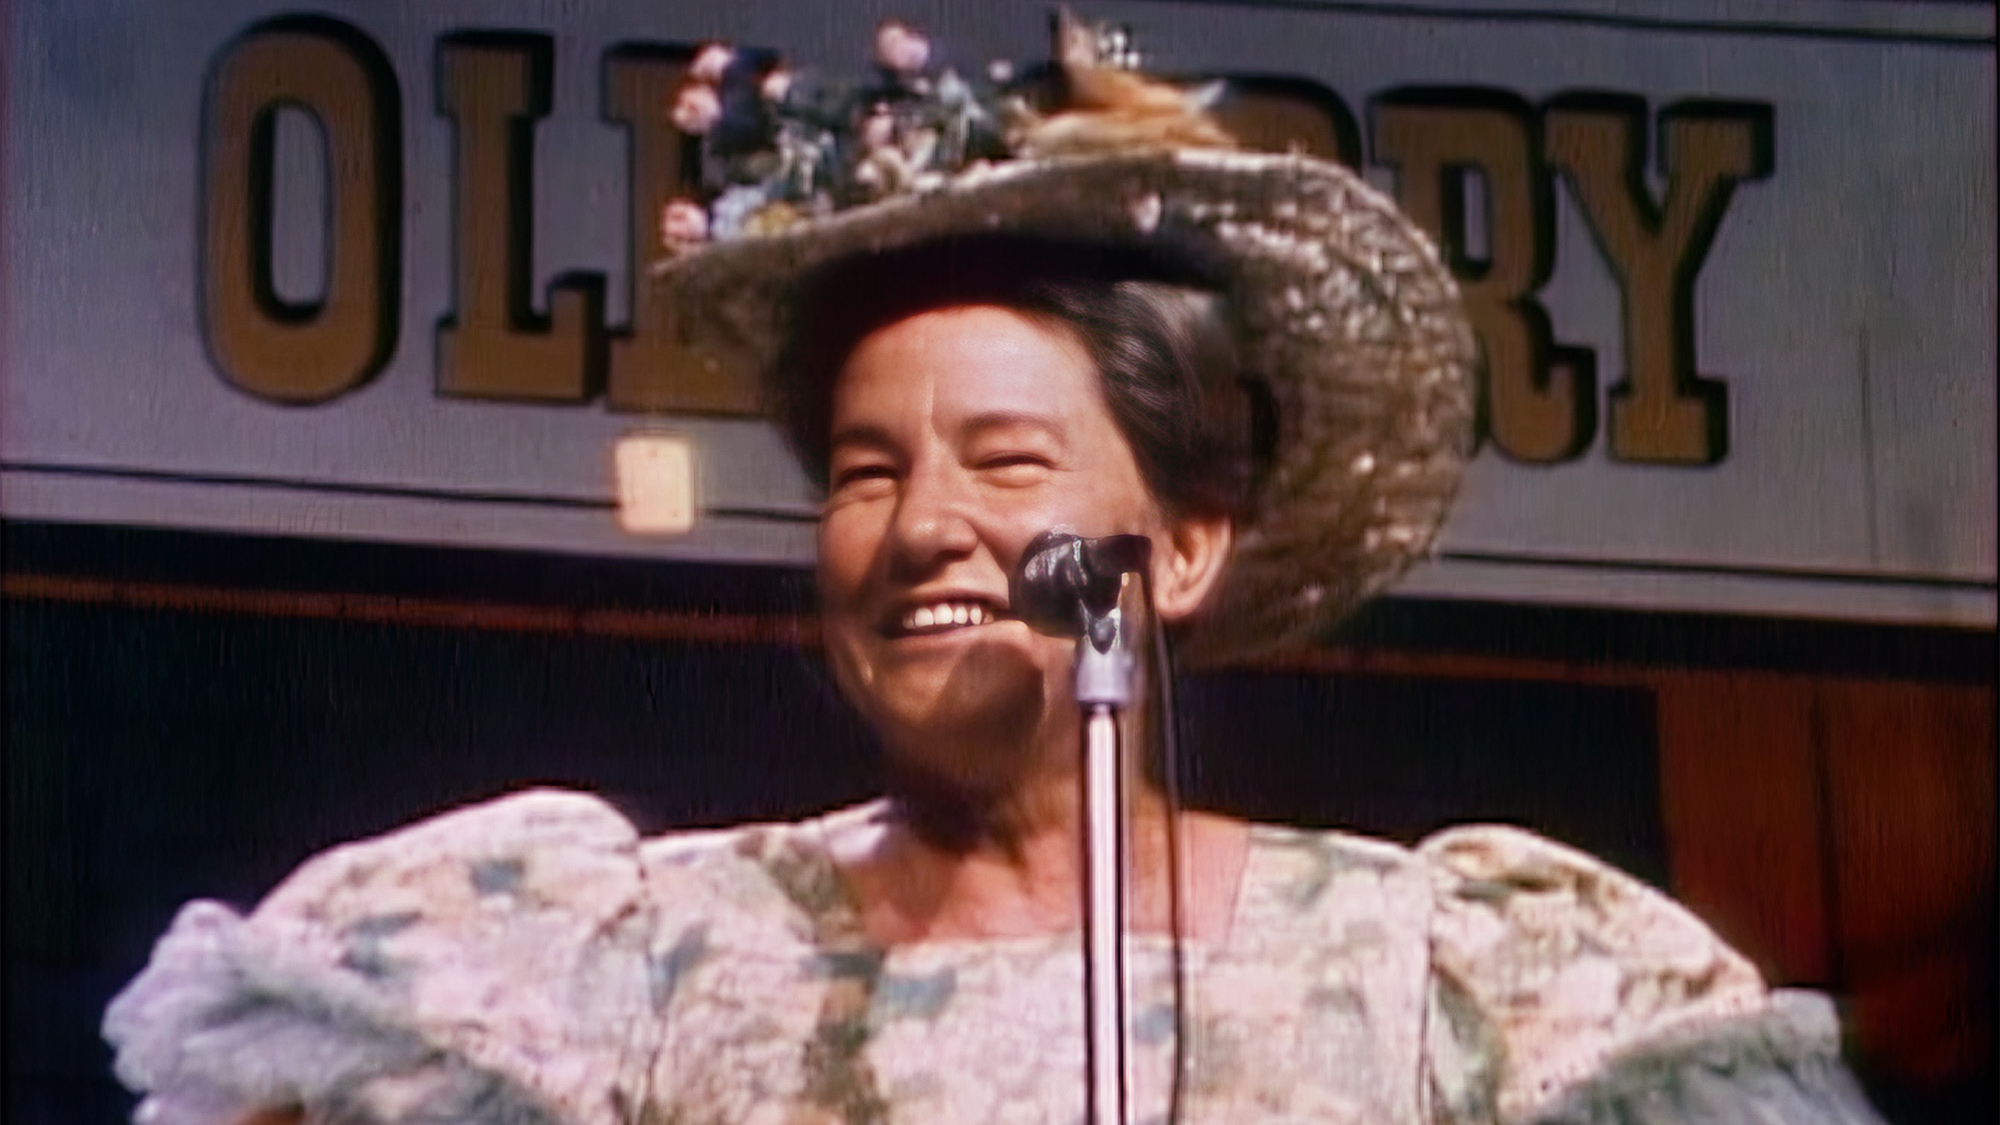 Check out Facing the Laughter: Minnie Pearl airing on a public television station near you!